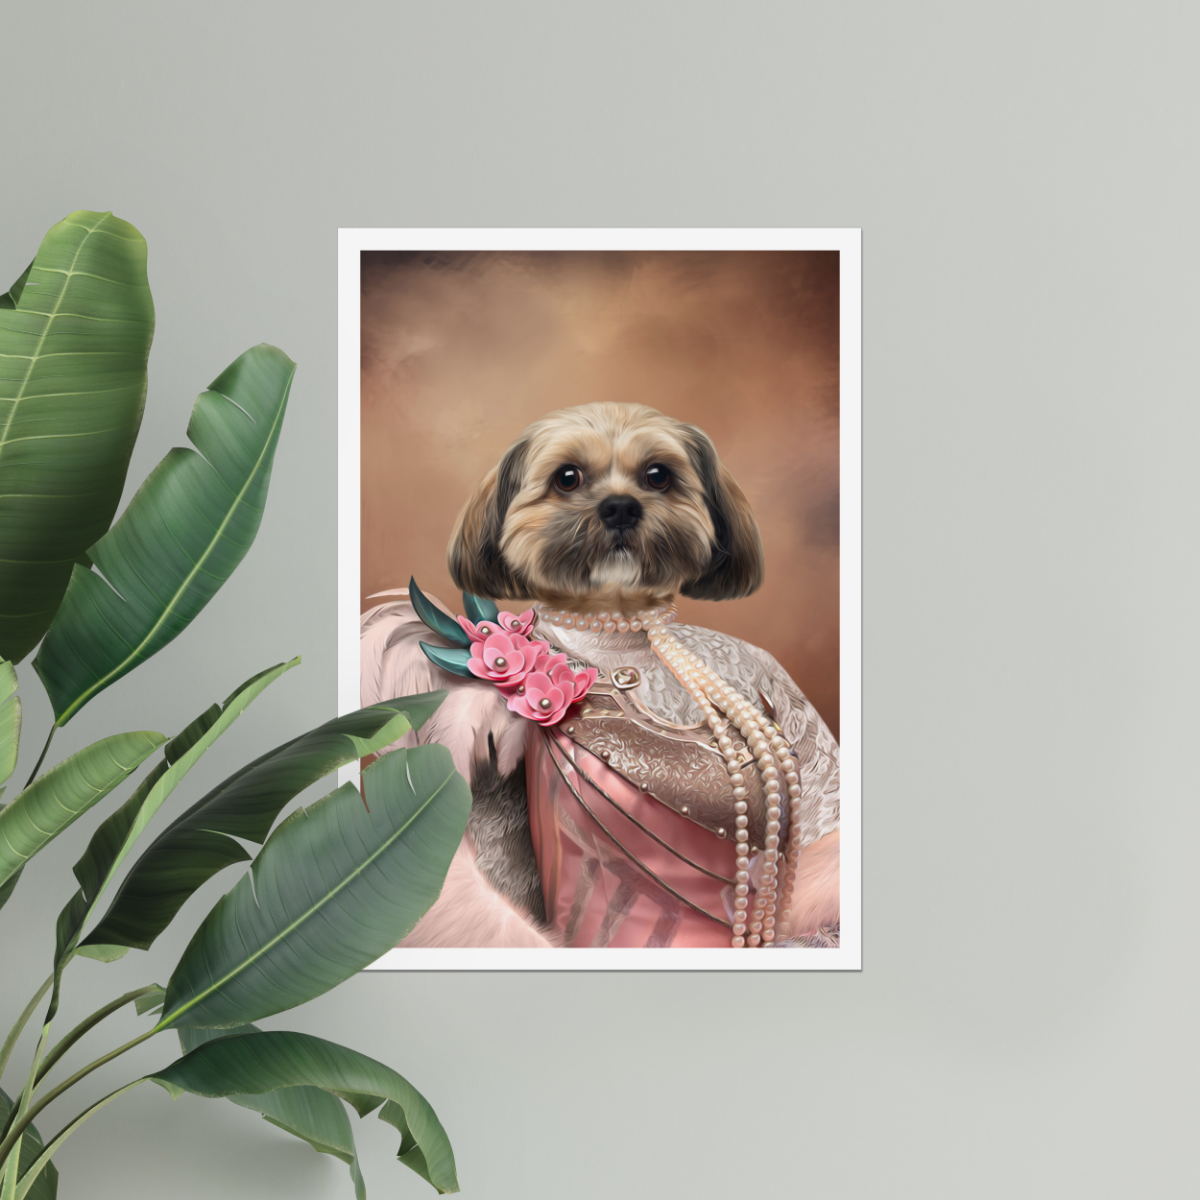 The Fur Lady: Custom Pet Poster - Paw & Glory - #pet portraits# - #dog portraits# - #pet portraits uk#Paw & Glory, paw and glory, dog painting pictures happy tails portraits pet painting in costume cat painting royal funny dog canvas art print your pet uk pet portrait